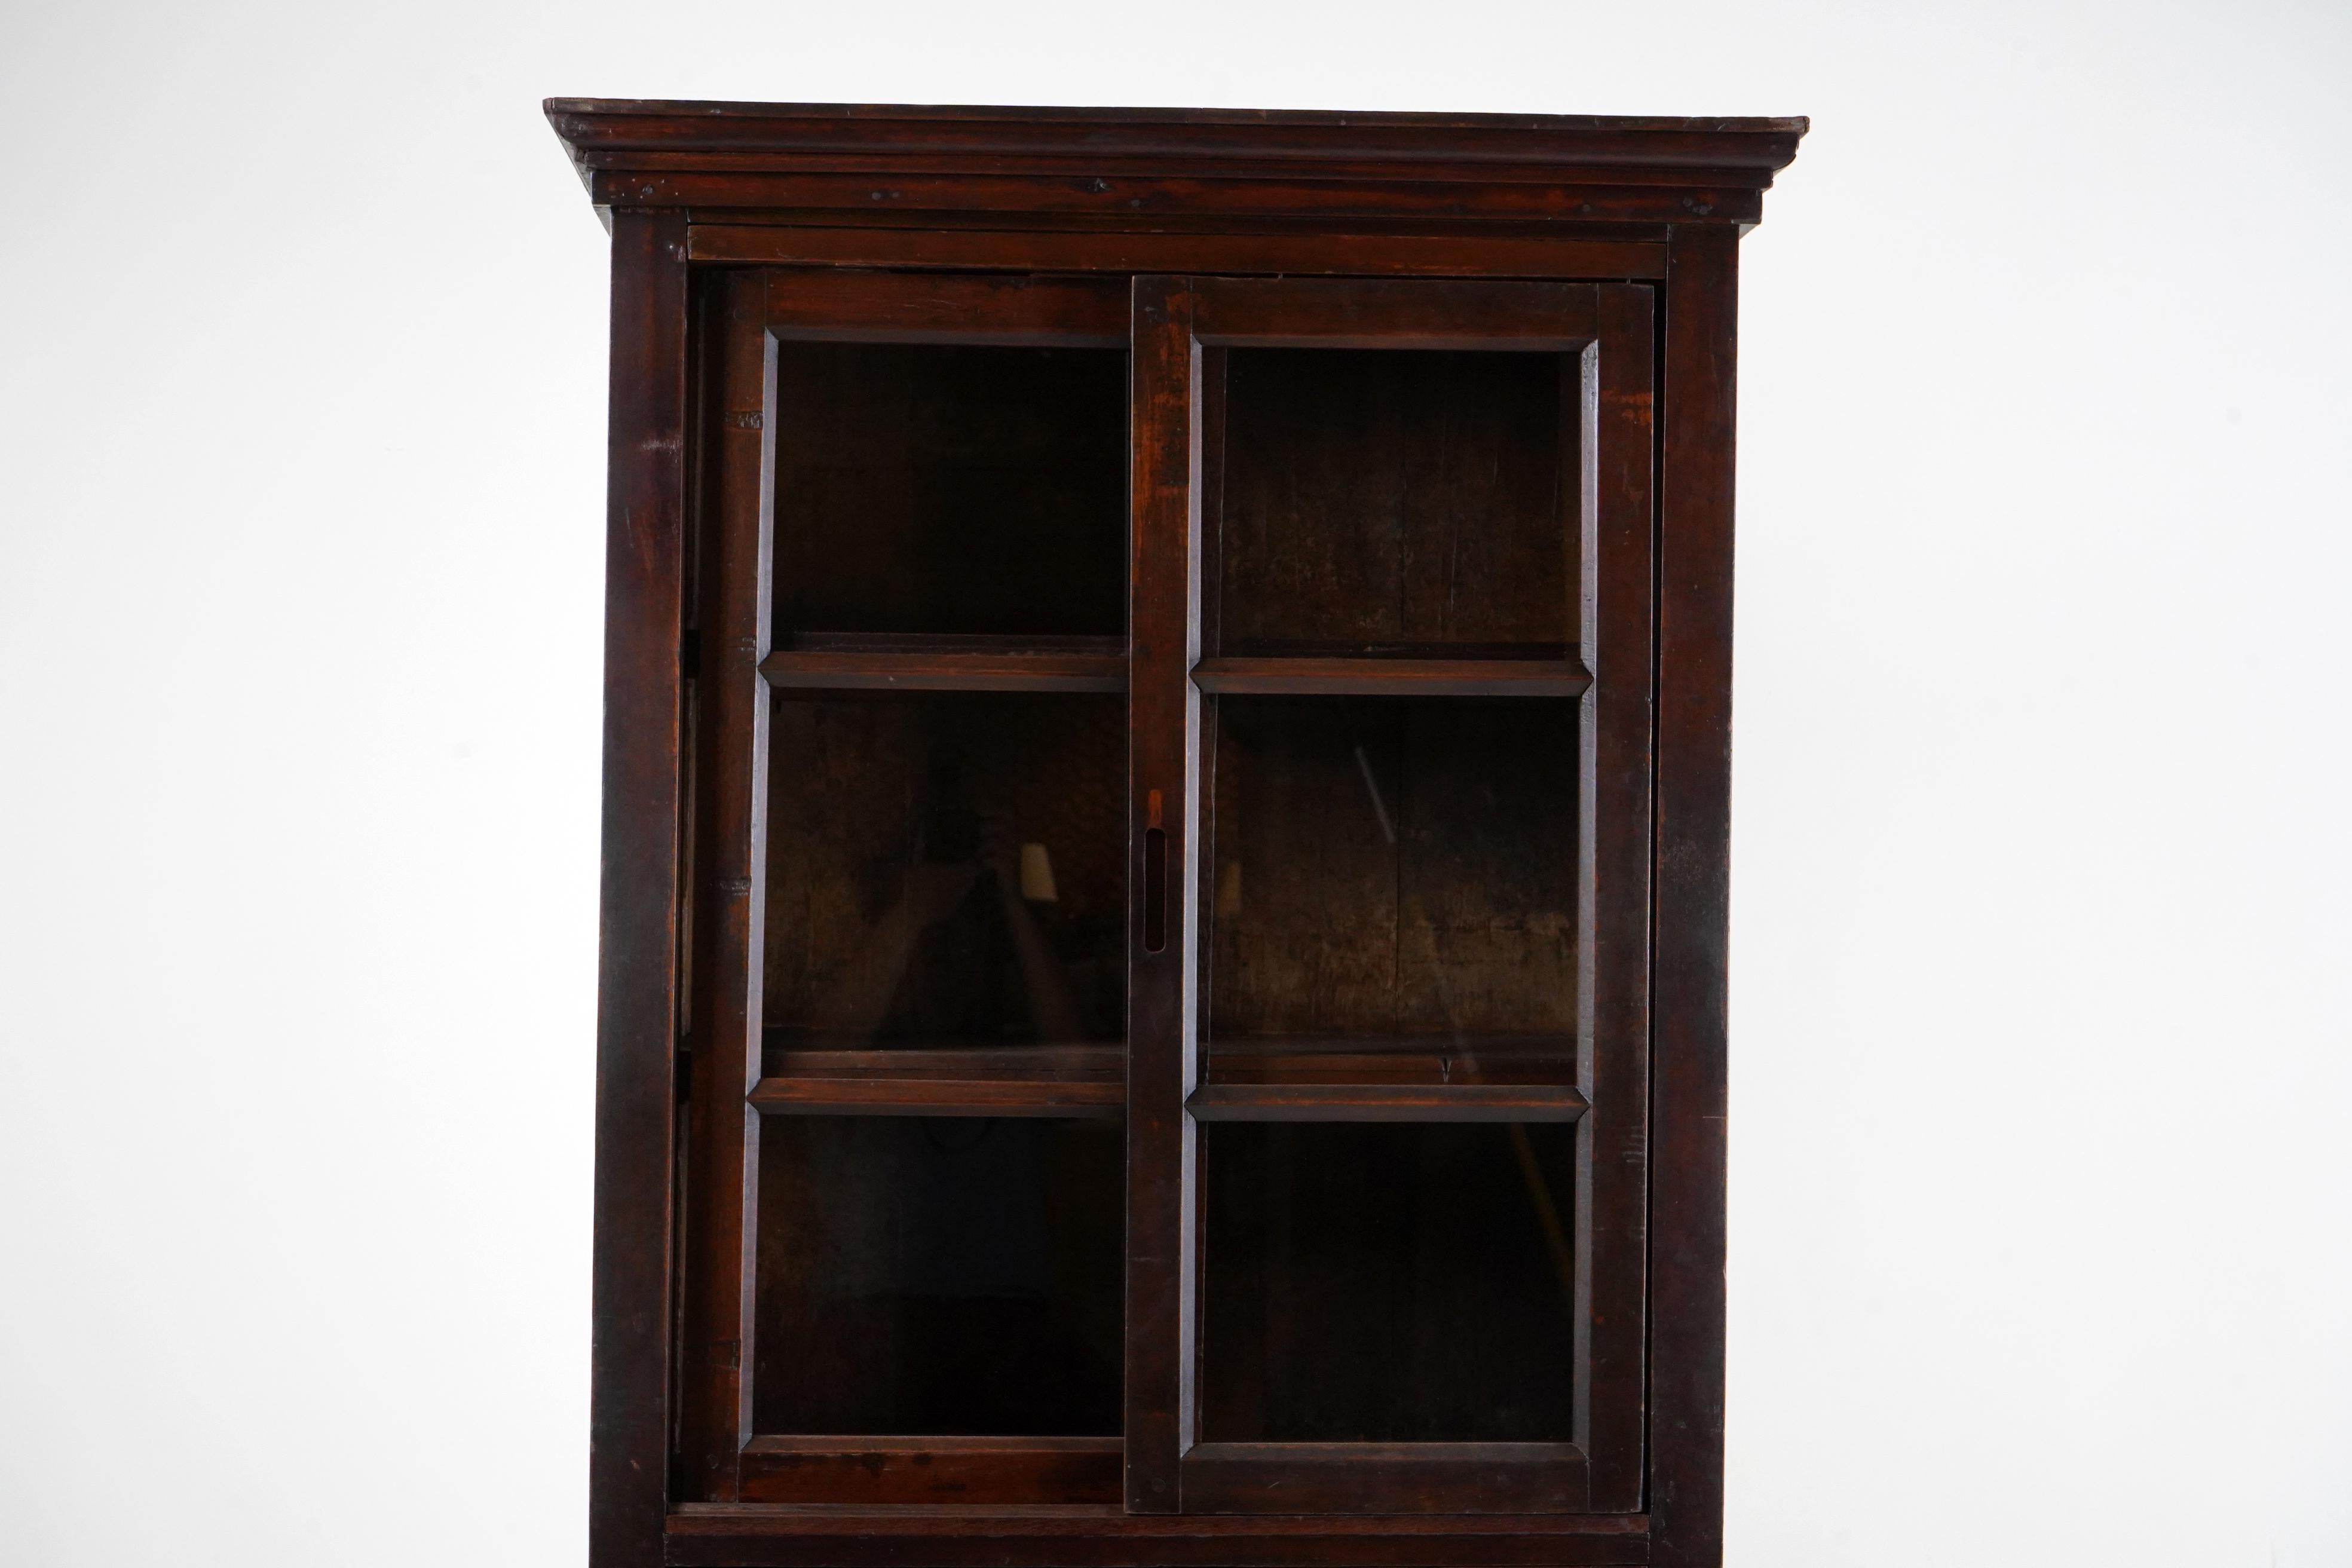 A British Colonial Teak Wood  Book Cabinet  1